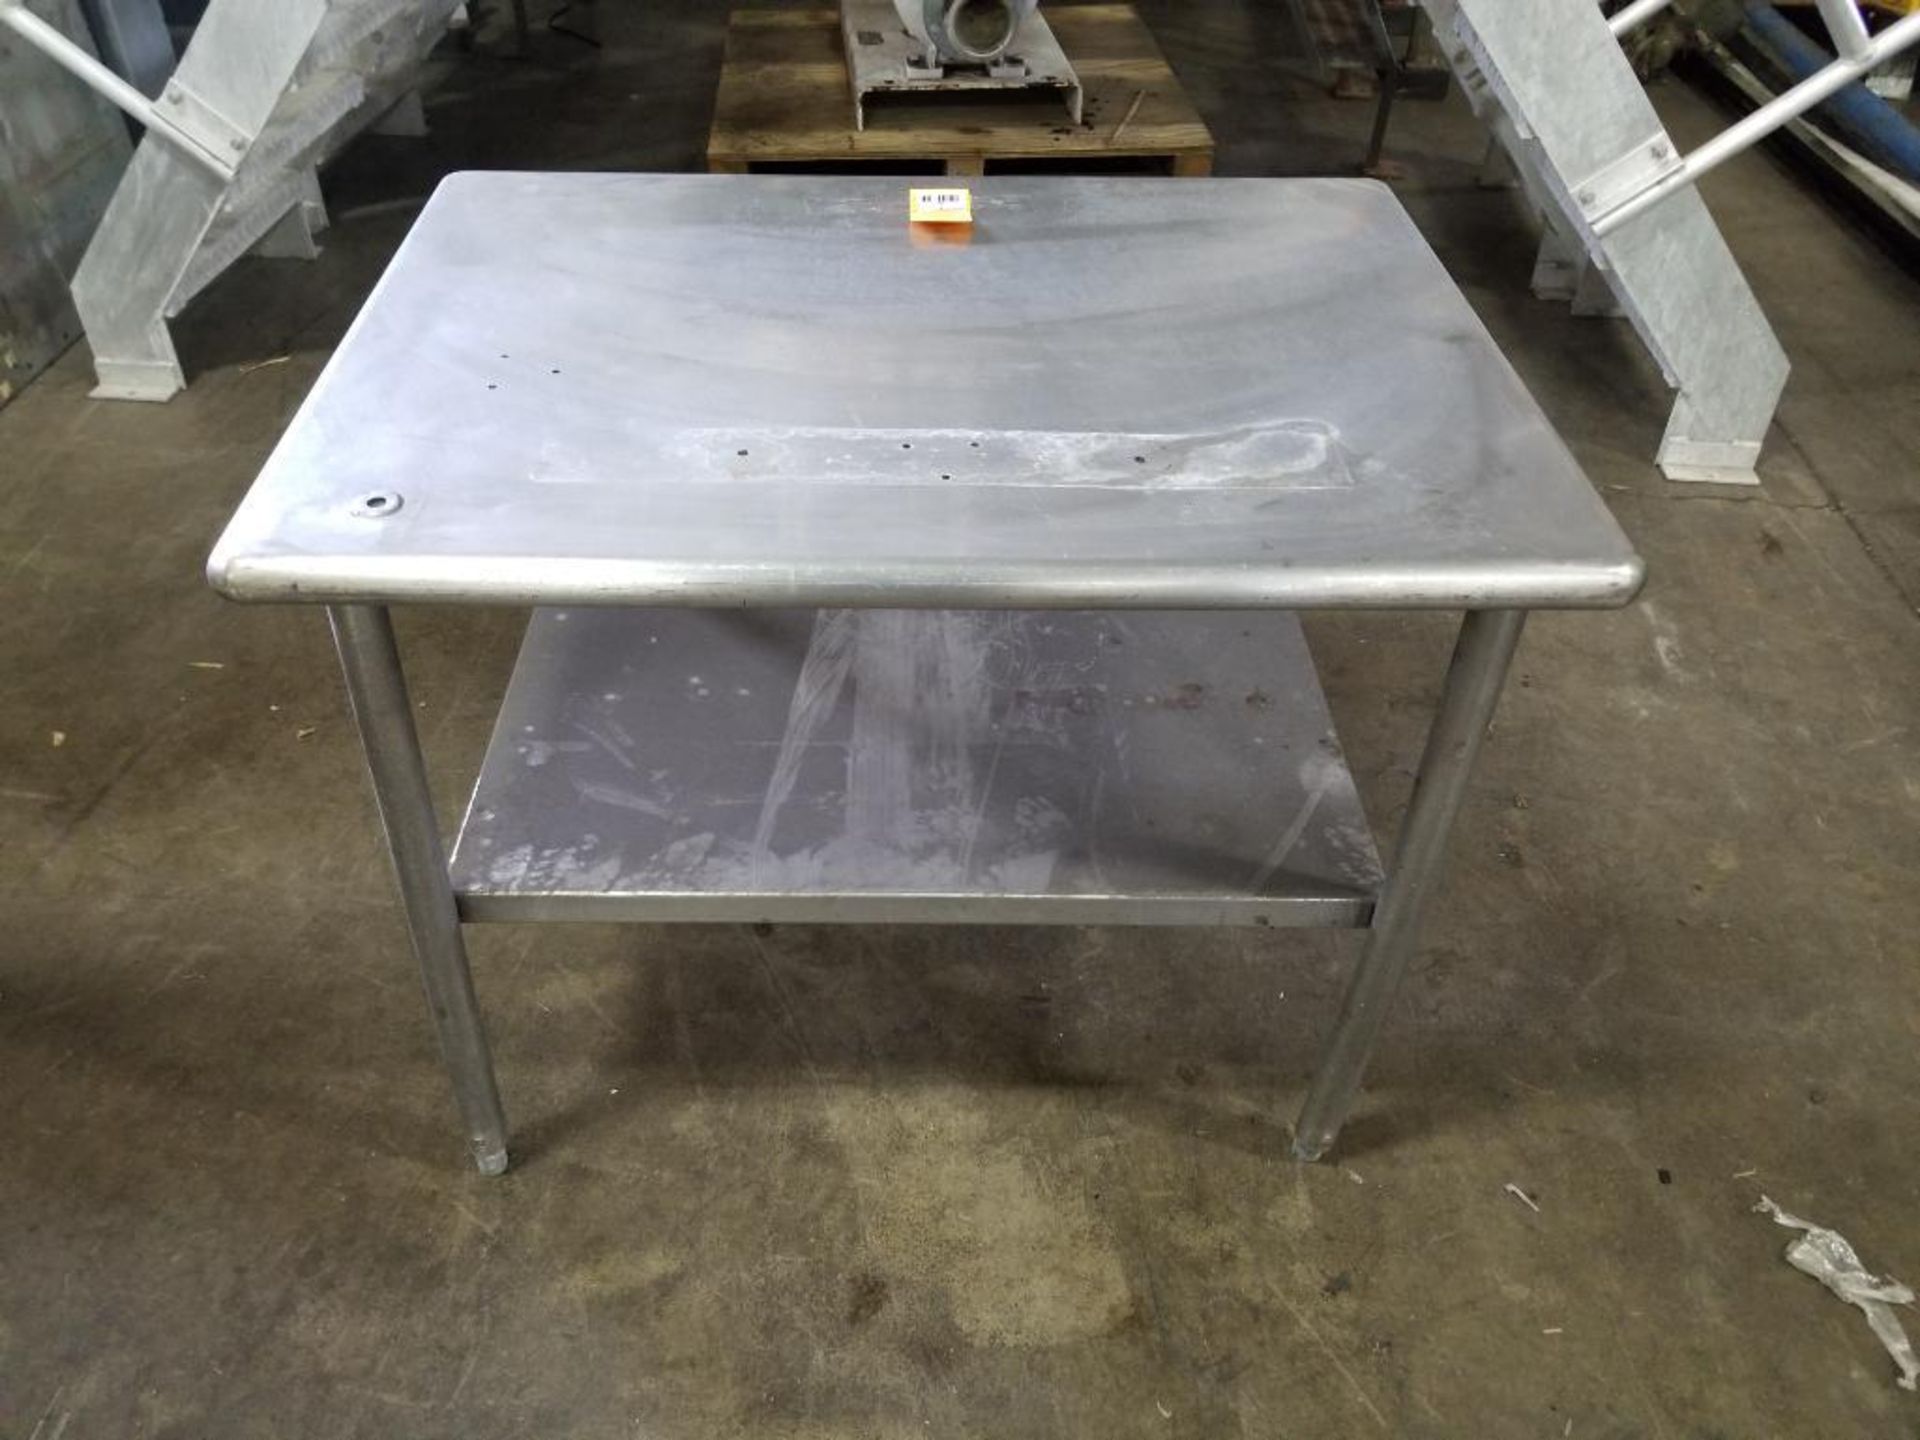 Stainless steel prep table. 40" wide x 30" deep x 30" tall. - Image 3 of 3